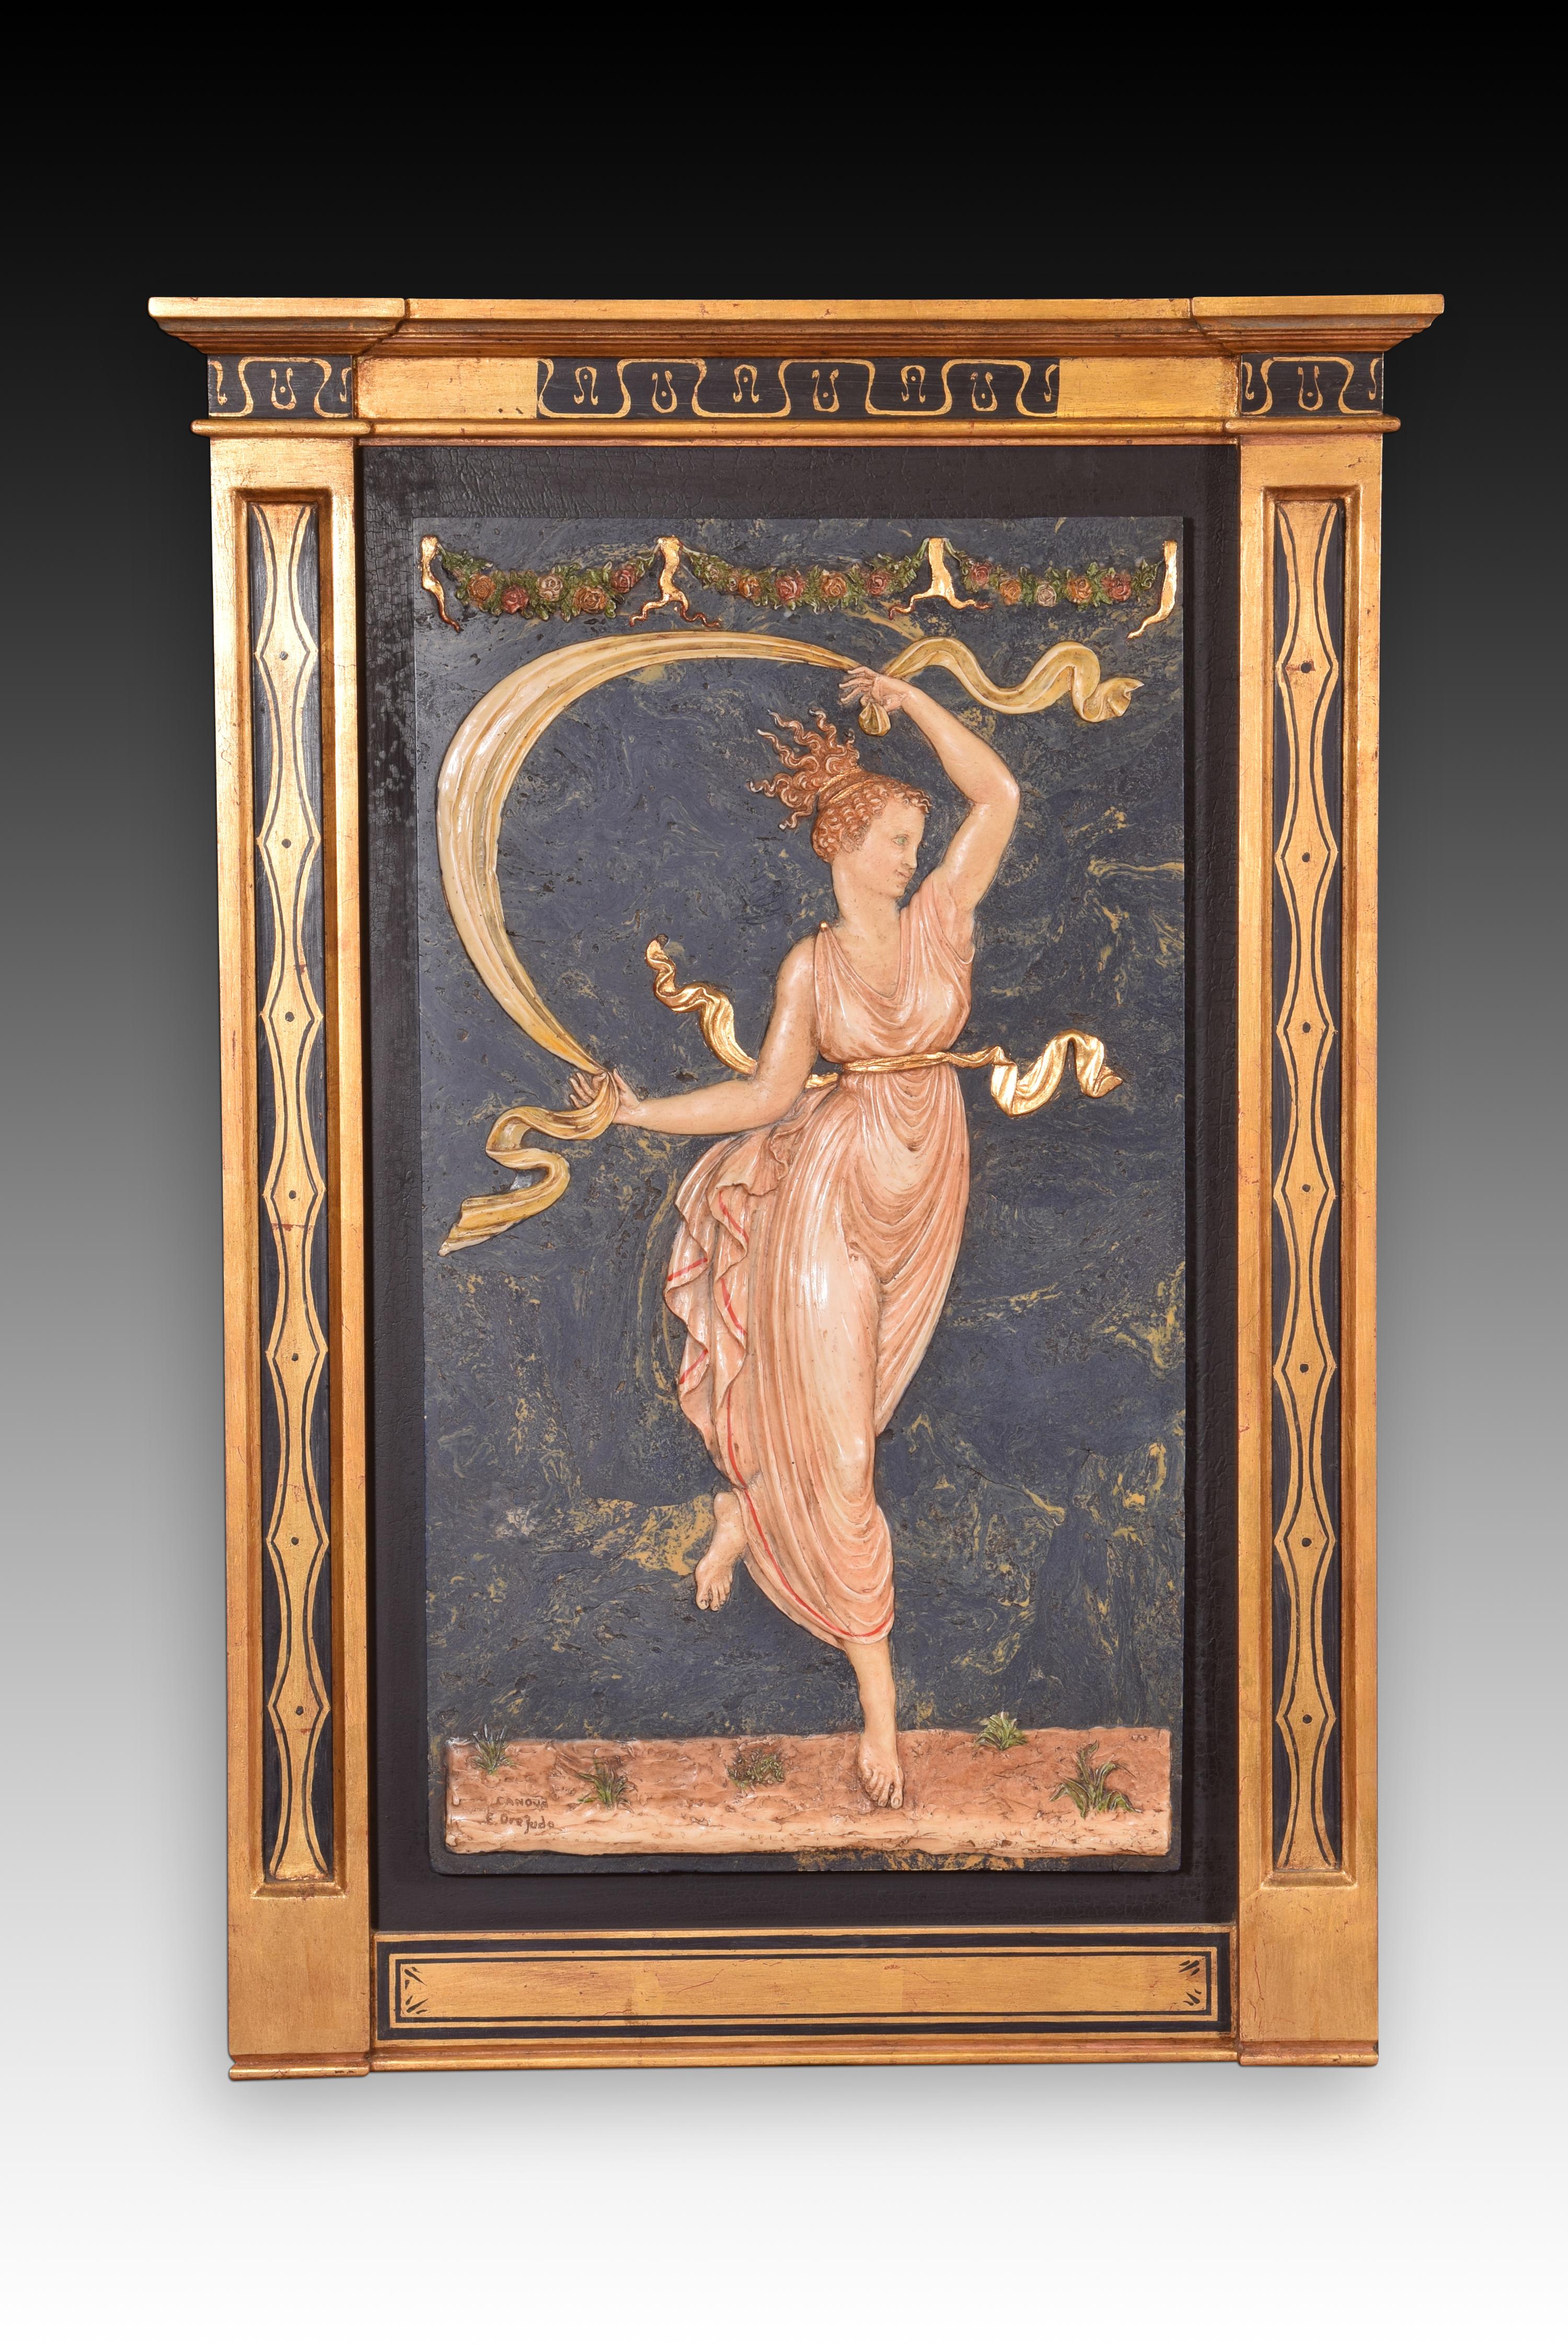 Pair of panels, Dancers. Molded alabaster. 20th century, inspired by CANOVA, Antonio (1757-1822). 
Pair of reliefs with frames made of alabaster molded with polychrome, inspired by the reliefs that show two young people dancing in a fresco by